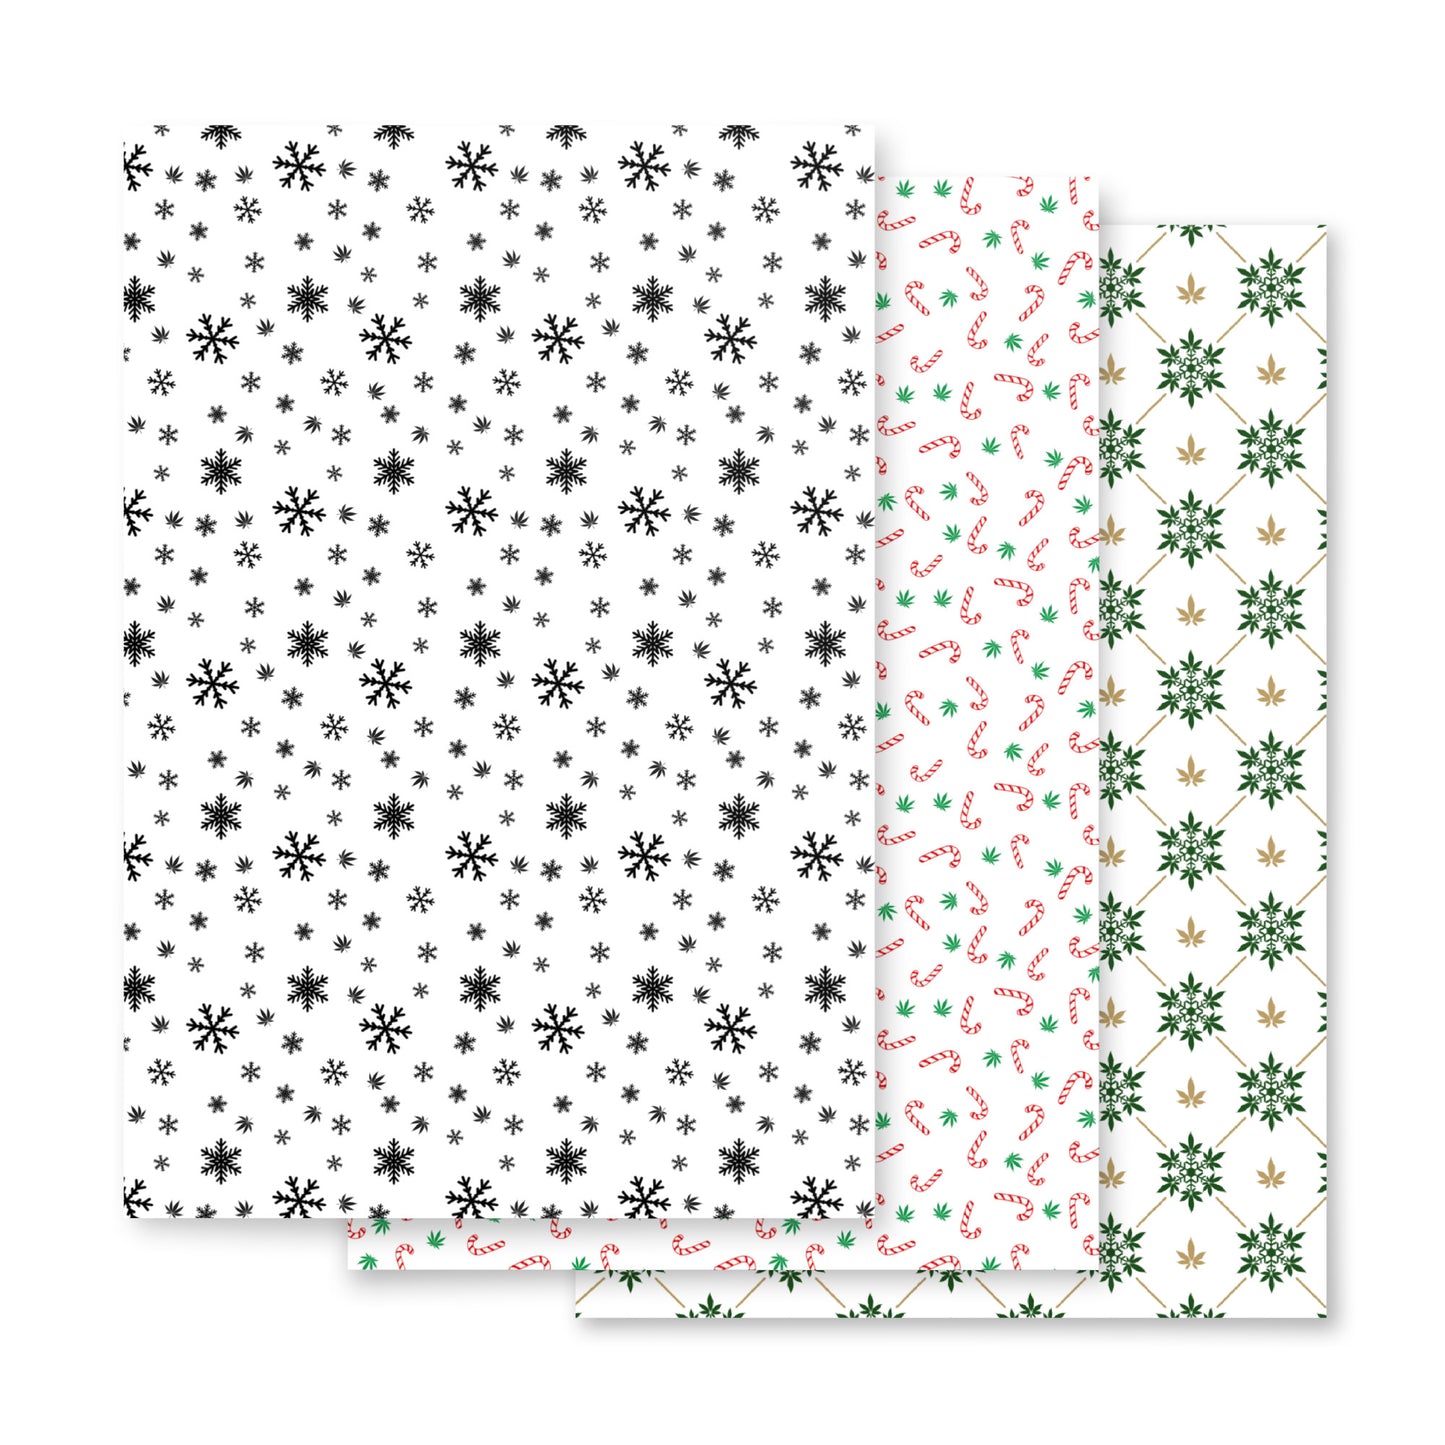 CannaMas Wrapping paper sheets